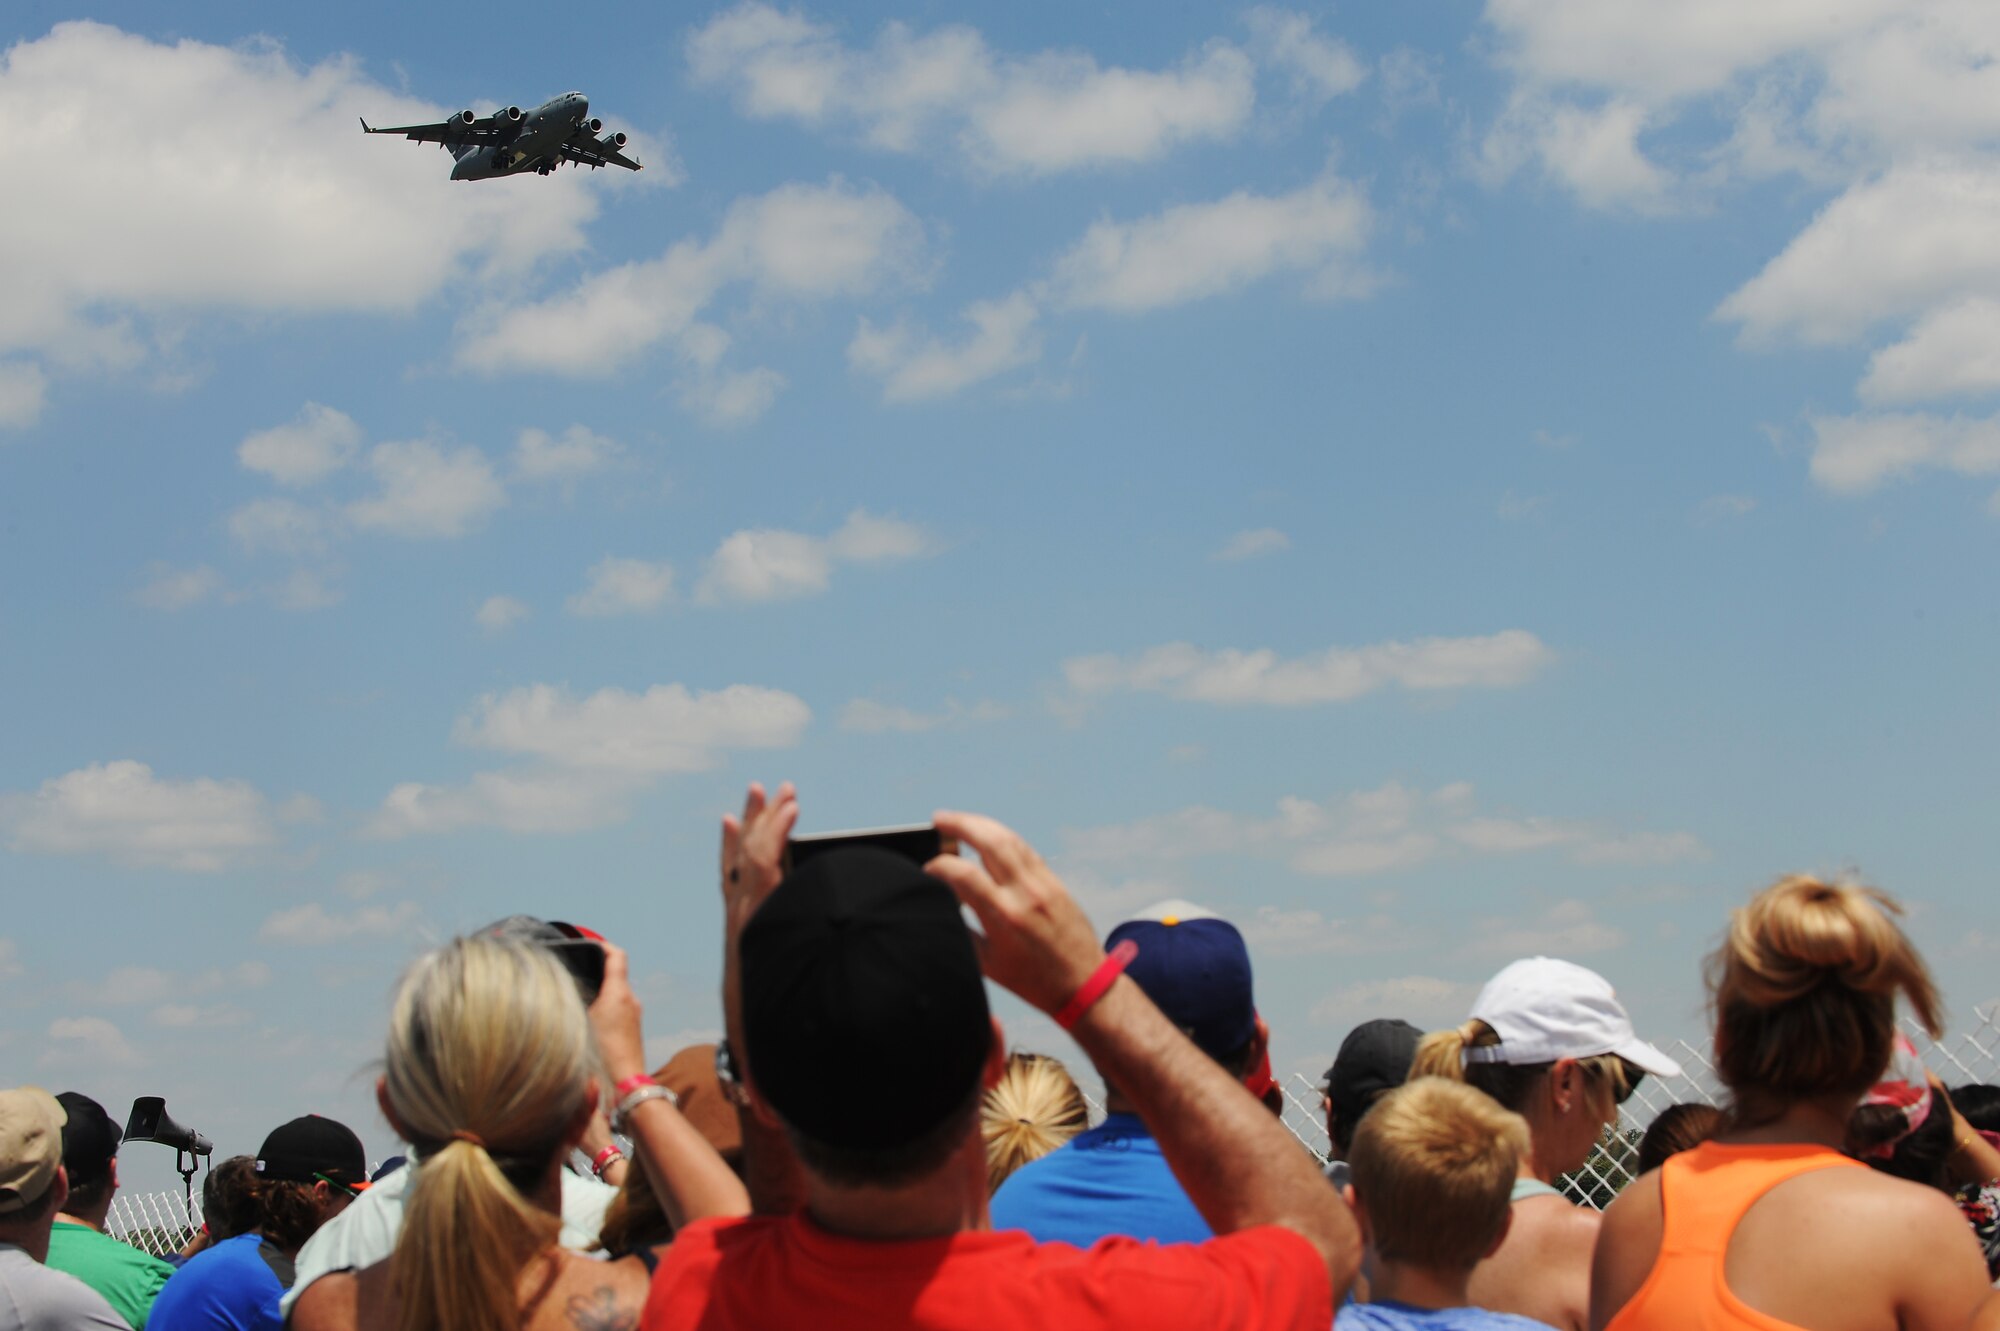 A 15th Wing C-17 Globemaster III conducts a fly-by during the Scott Air Force Base 2017 Air Show and Open House June 11, which celebrates the base’s 100th anniversary.  The aircraft is normally operated by a crew of three people: pilot, co-pilot and loadmaster. Cargo is loaded onto the C-17 through a large aft door that accommodates military vehicles and palletized cargo.  The aircraft can take off and land on runways as short as 3,500 feet long and only 90 feet wide. (U.S. Air Force photo by Tech. Sgt. Maria Castle)